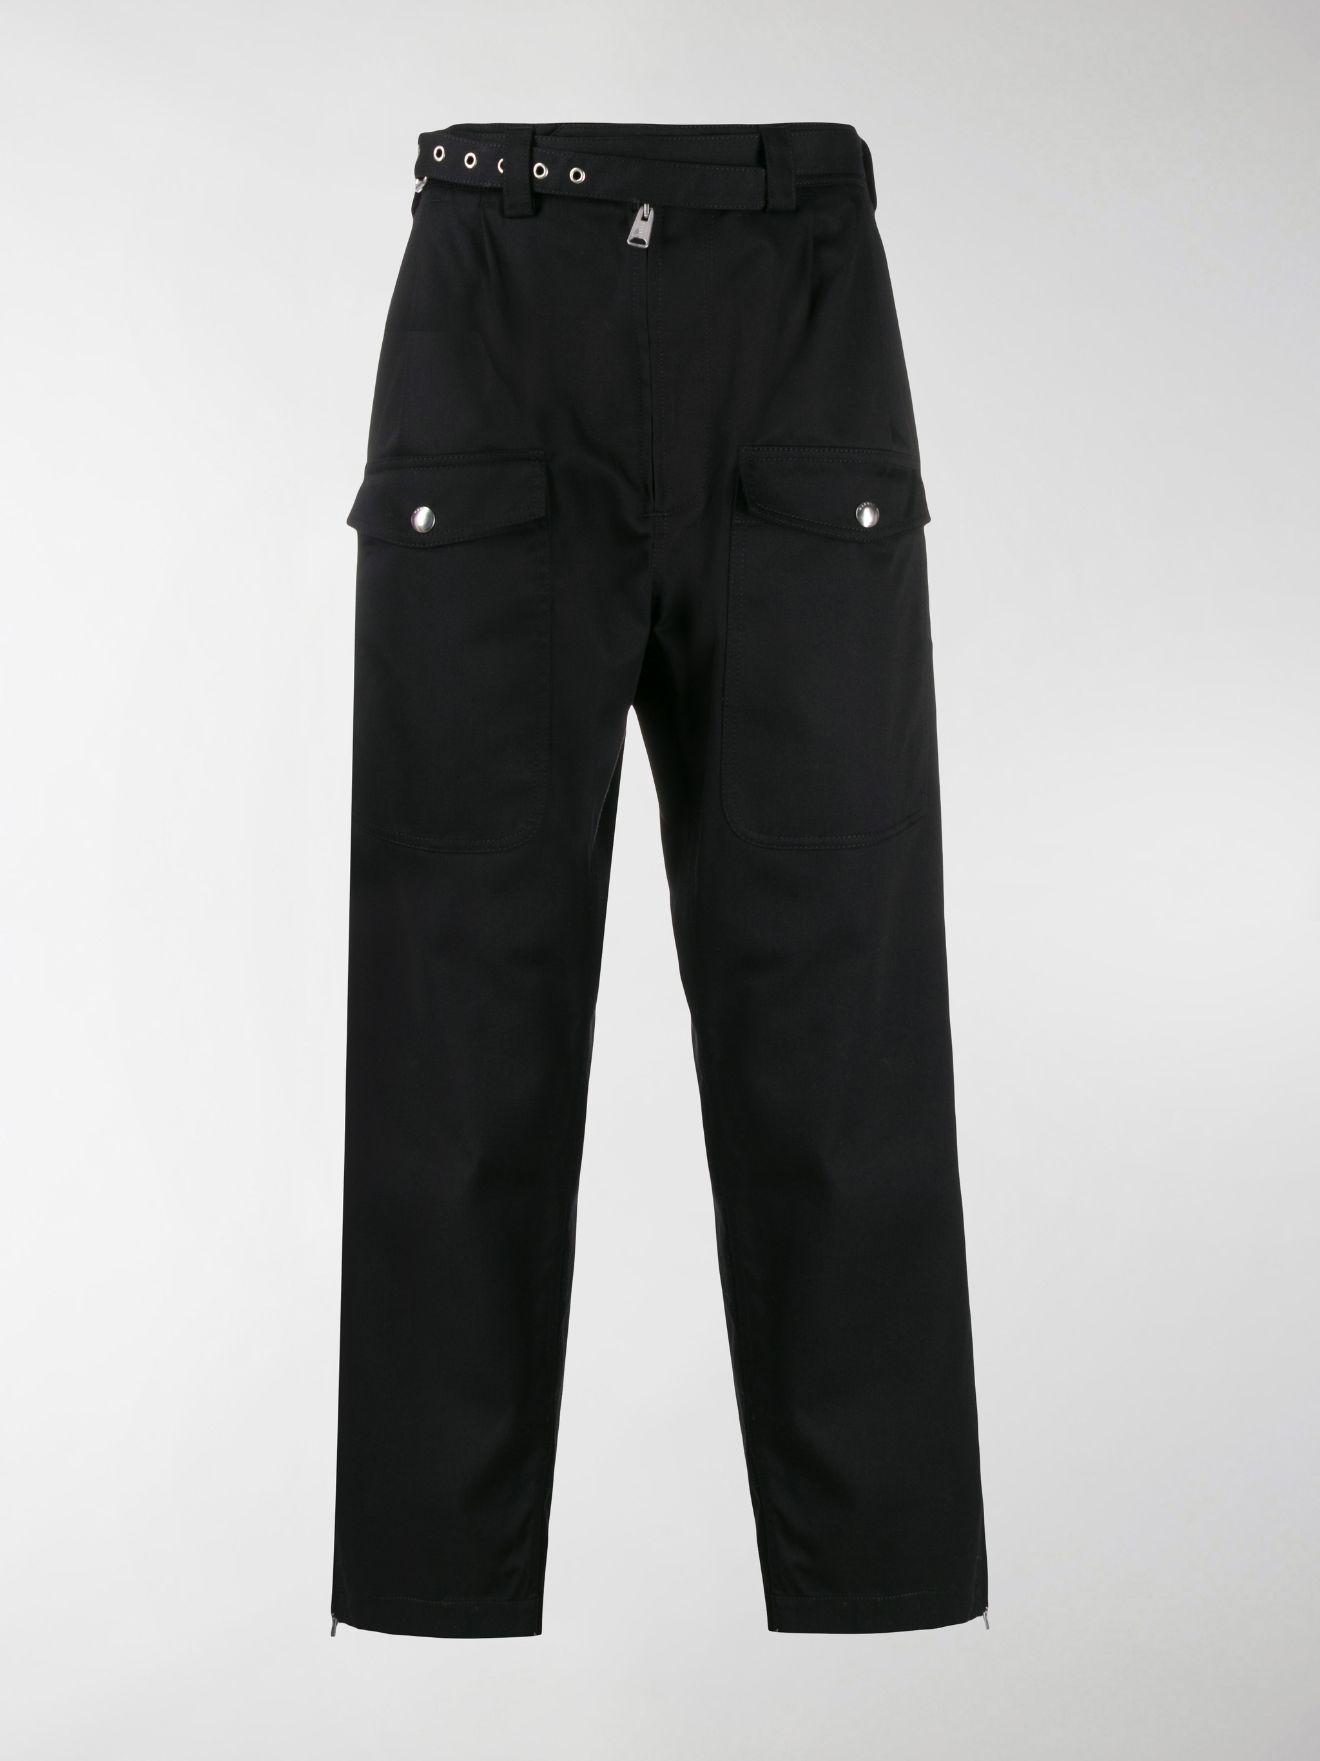 army trousers black